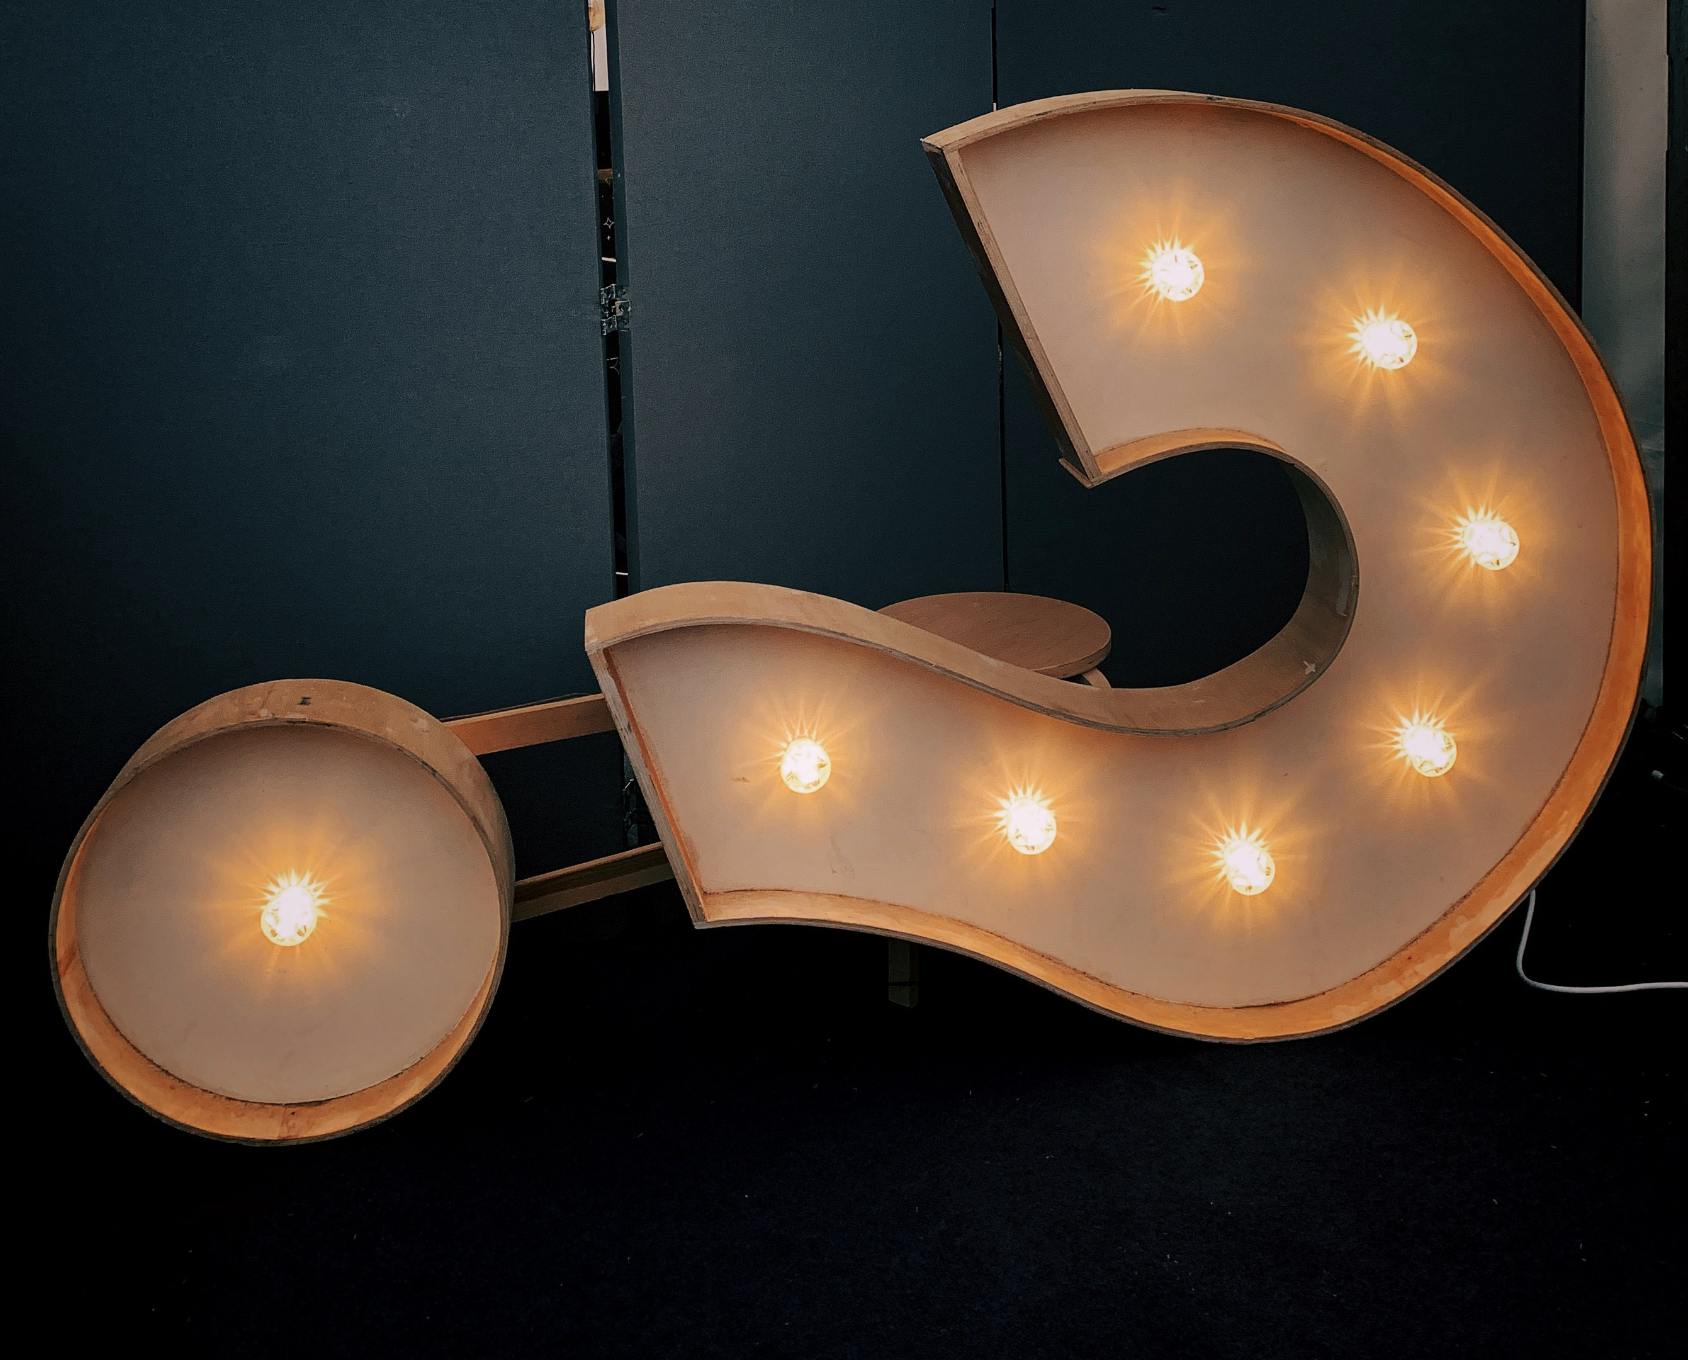 Buy Sell Love Durham Blog featured image of a lit up question mark